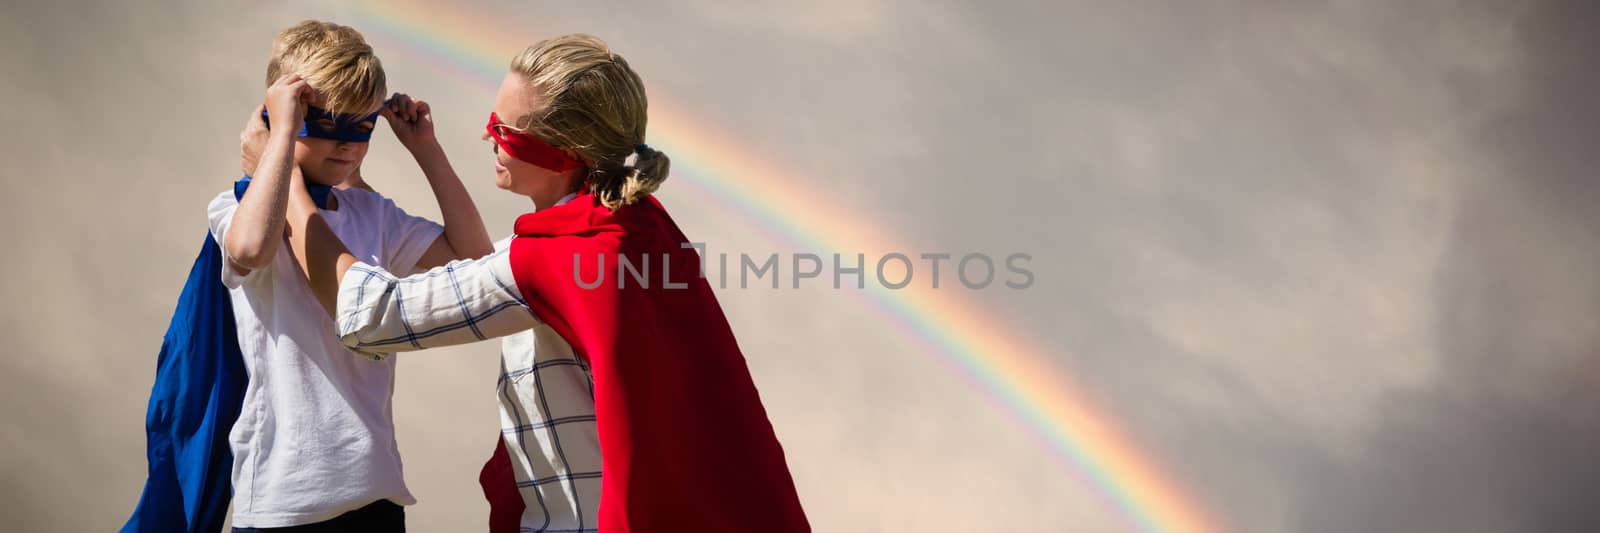 Mother and son pretending to be superhero against rainbow in a dark sky above the green hill